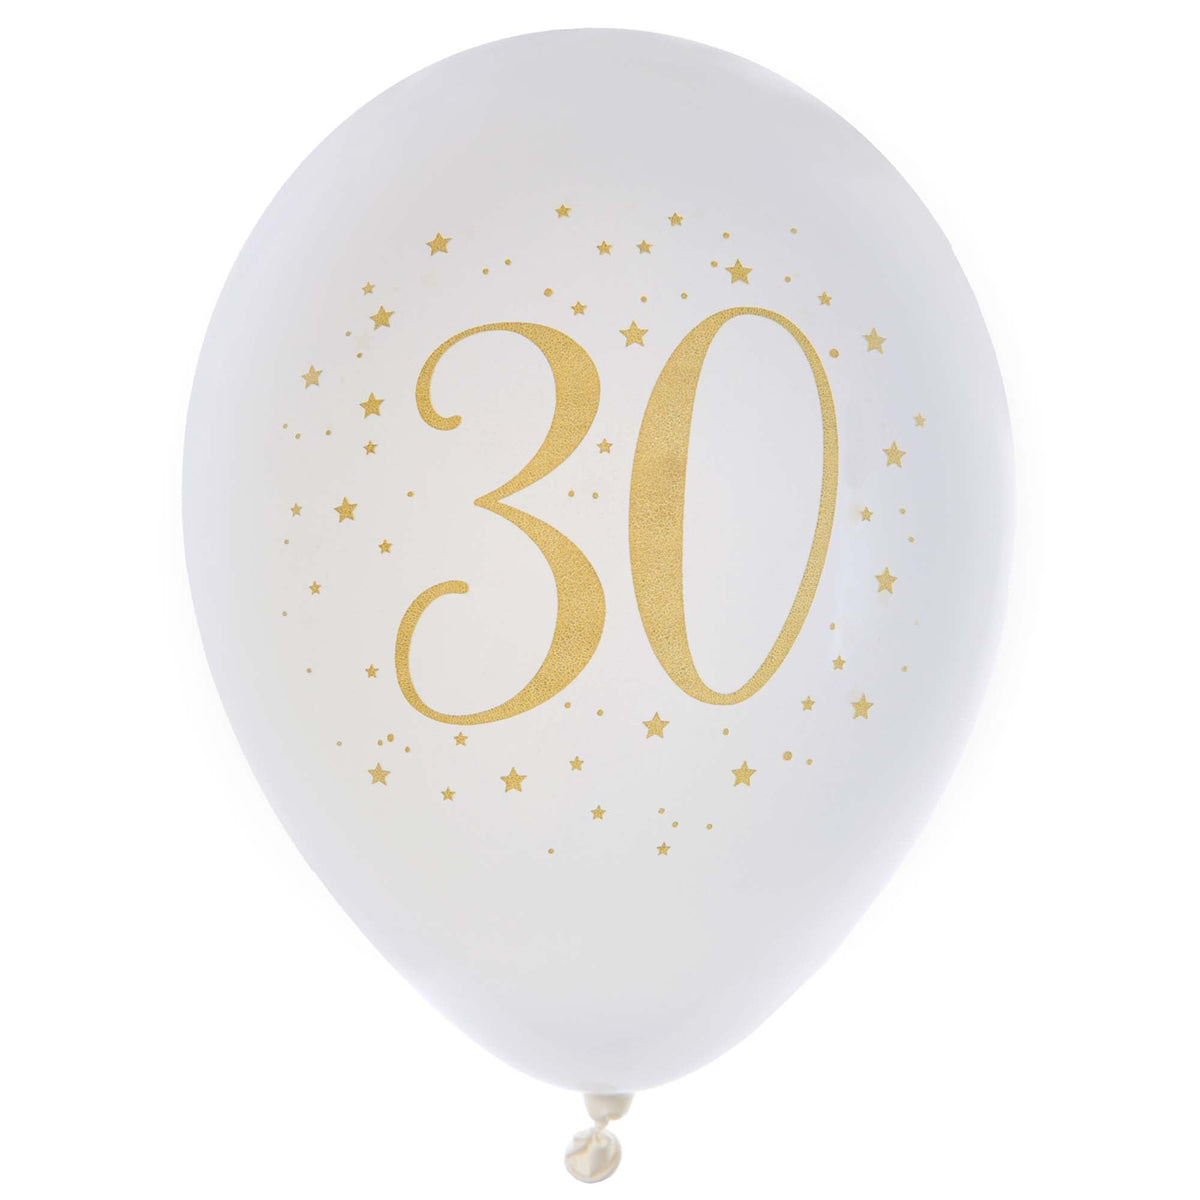 SANTEX Age Specific Birthday White and Gold 30th Birthday Latex Balloons, 12 Inches, 6 Count